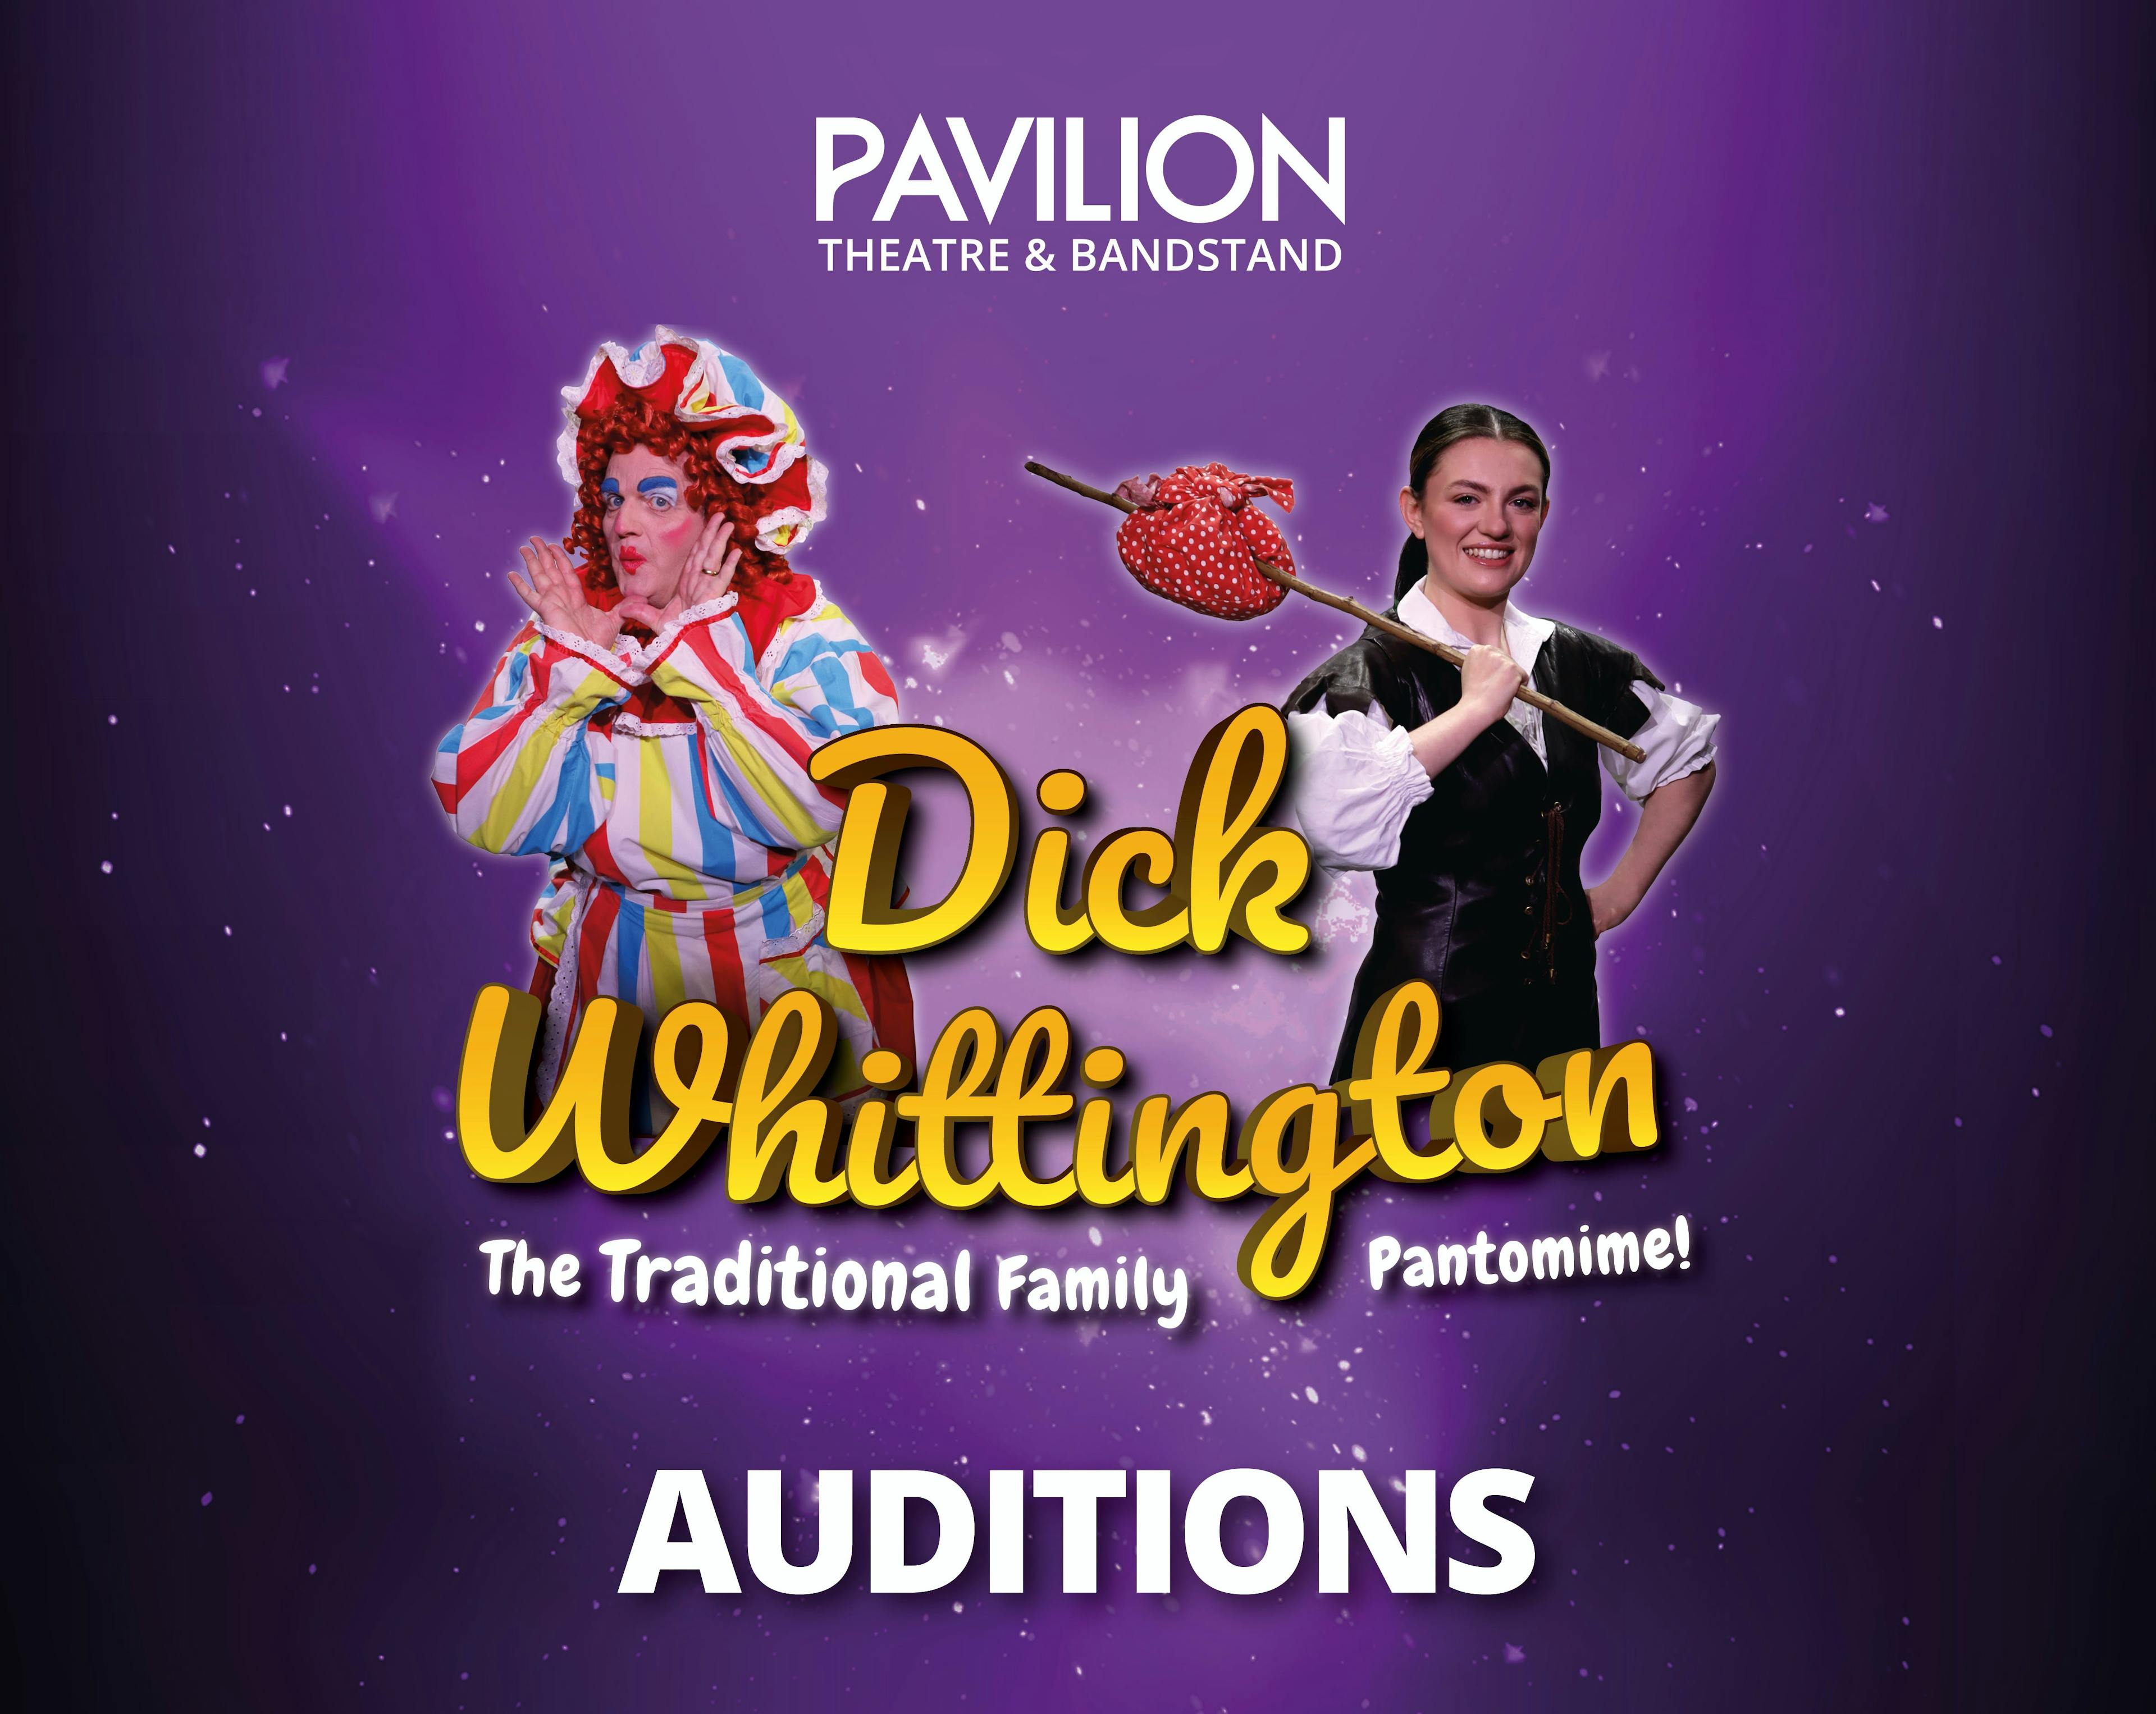 Auditions open for our 2023 pantomime Dick Whittington